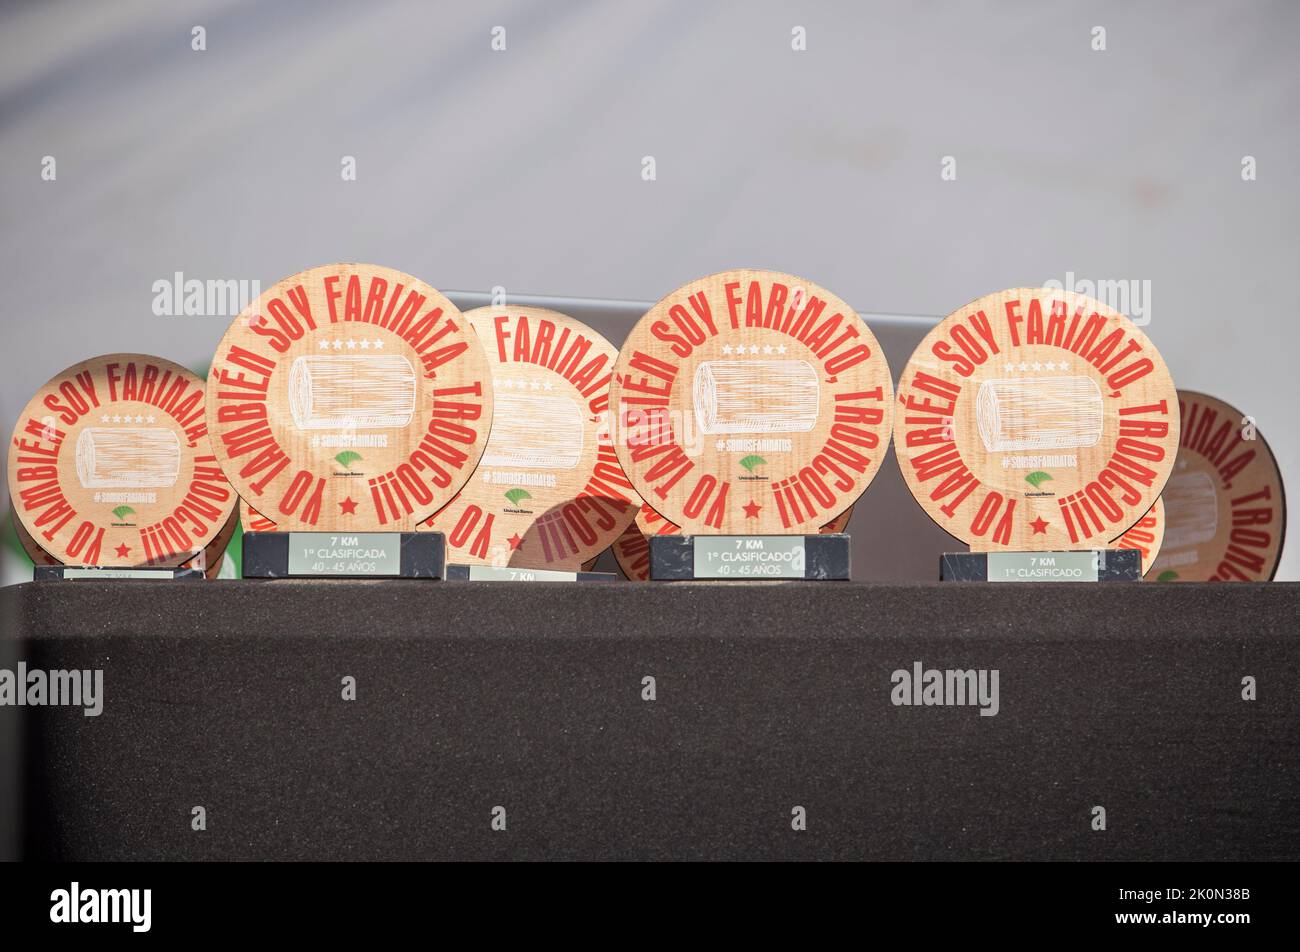 Merida, Spain - Sept 11th, 2022: FarinatoRace Merida 2022. Toughest obstacle course in the world. Awards table Stock Photo